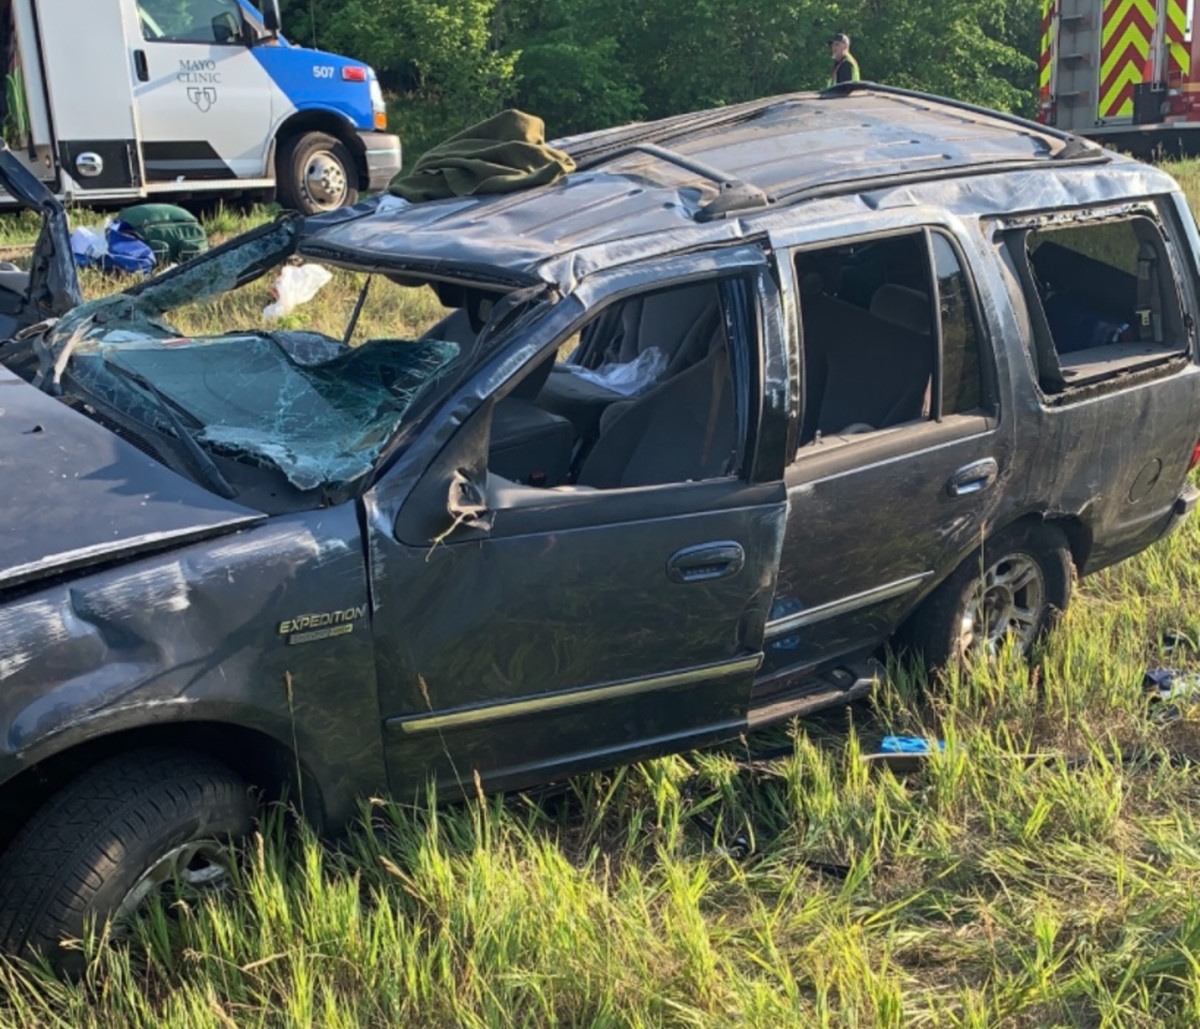 Stearns County Sheriff - County Road 9 crash - 07.05.21 - CROP